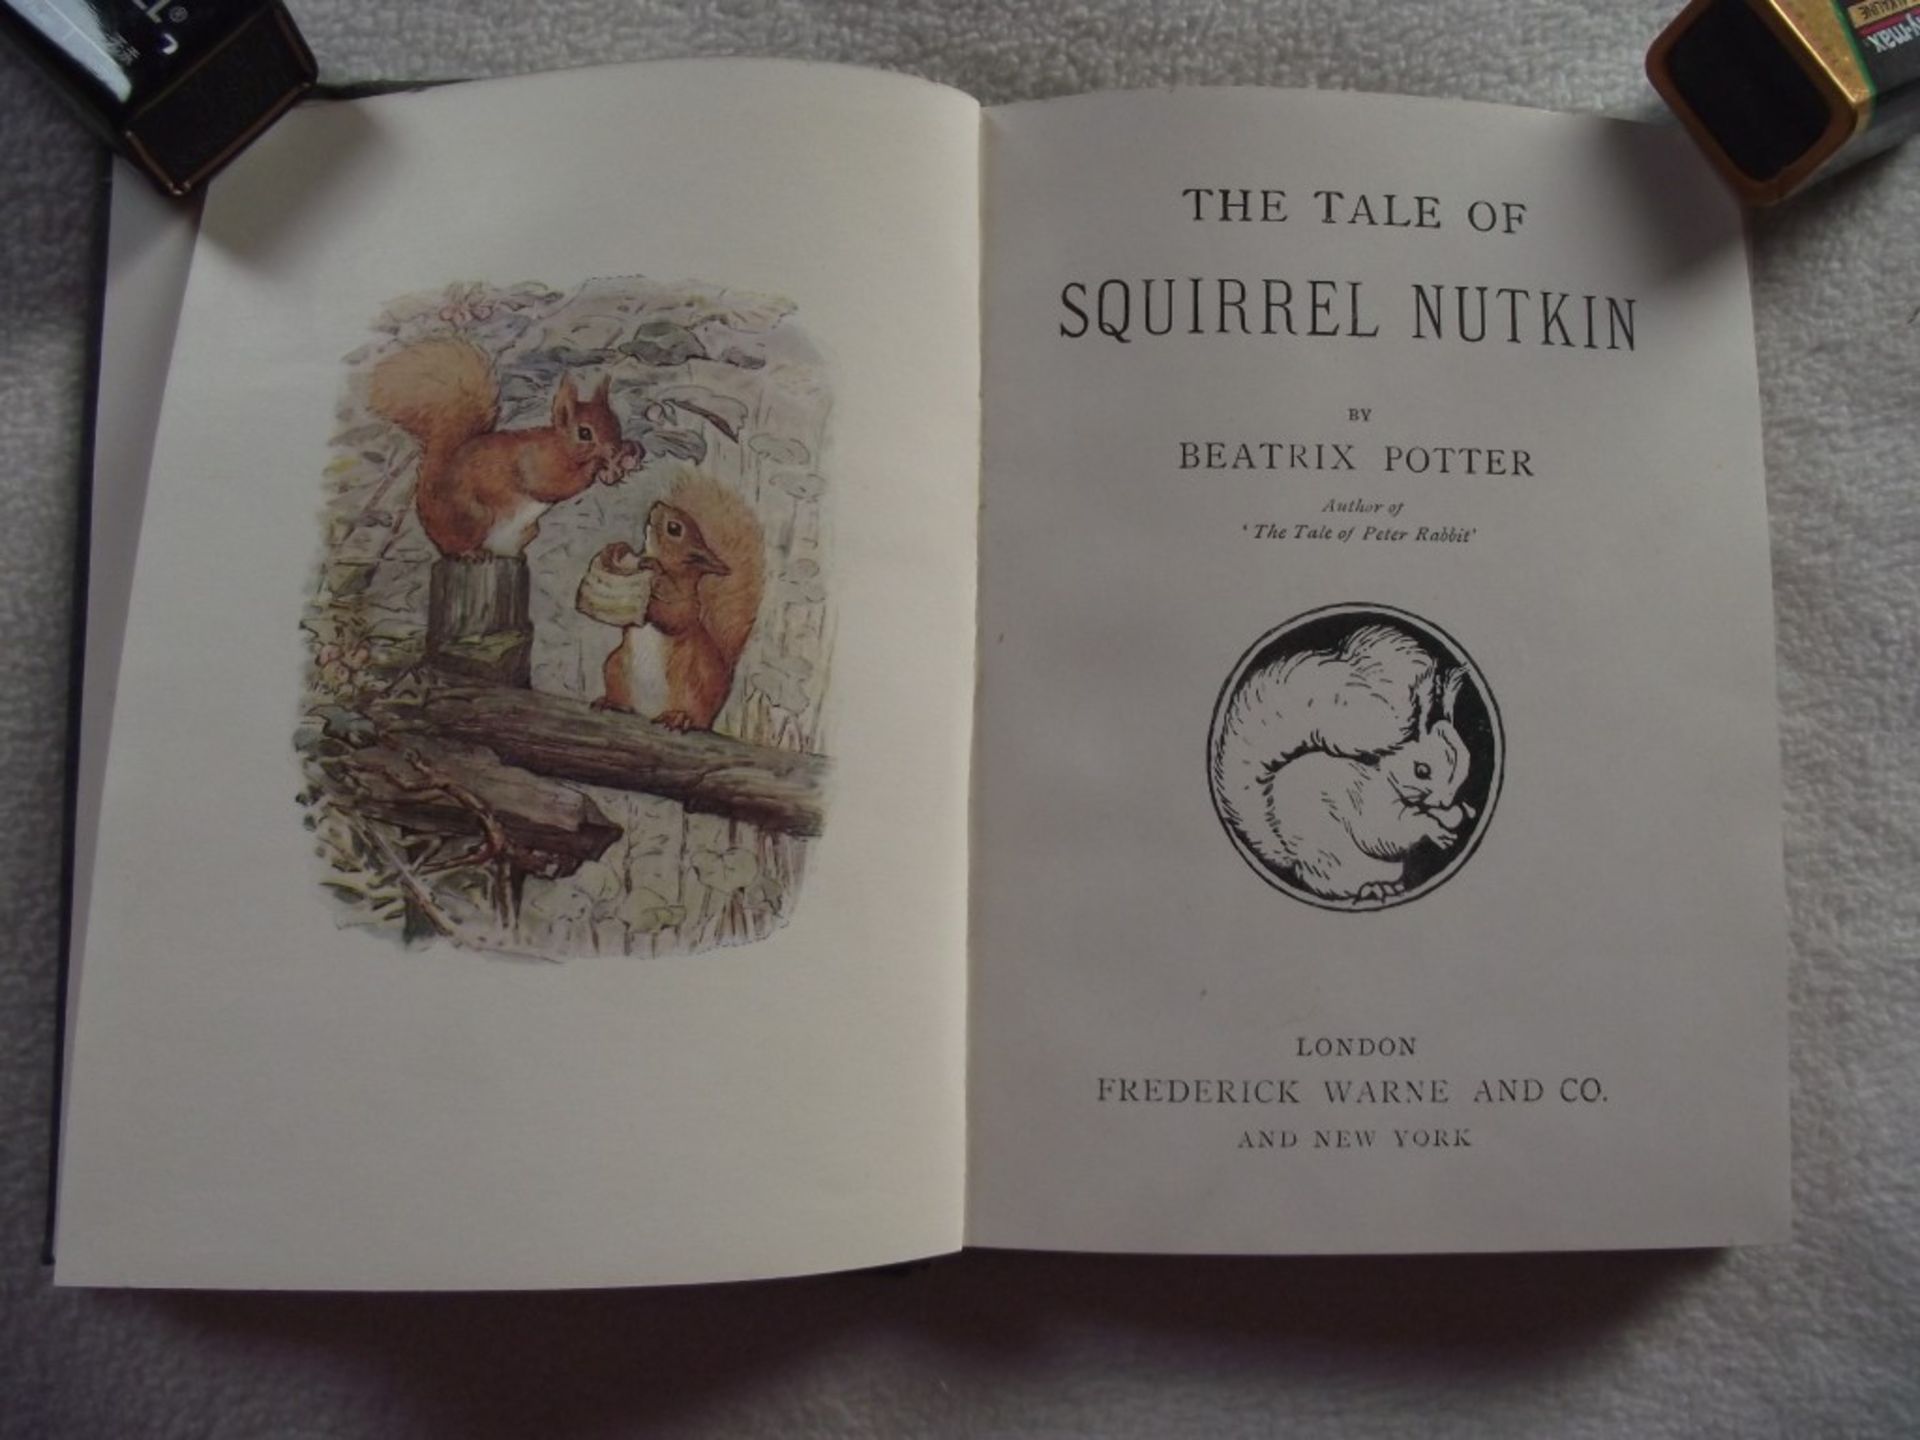 The Tale of Squirrel Nutkin By Beatrix Potter - Frederick Warne and Co. - Ca. 1904 - Image 5 of 27